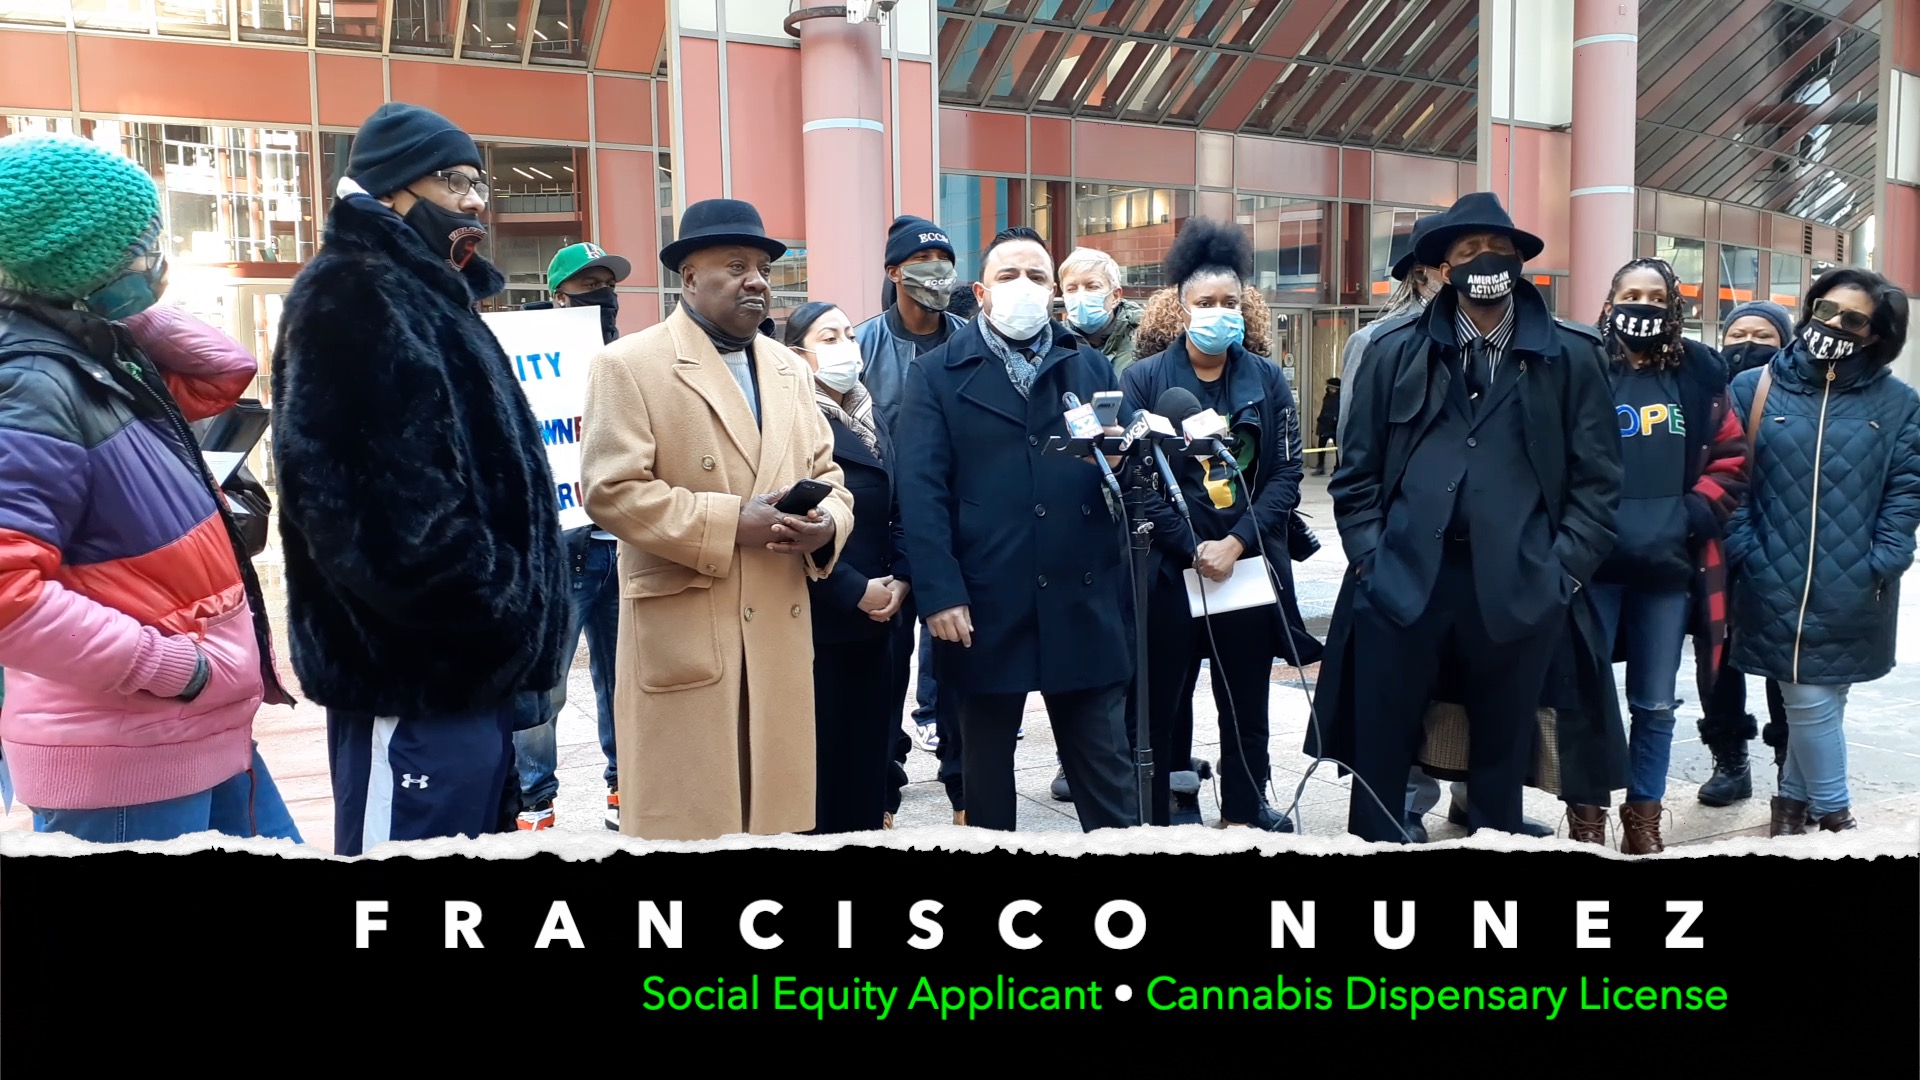 Chicago Social Equity Rights Press Conference Francisco Nunez 02-23-2021